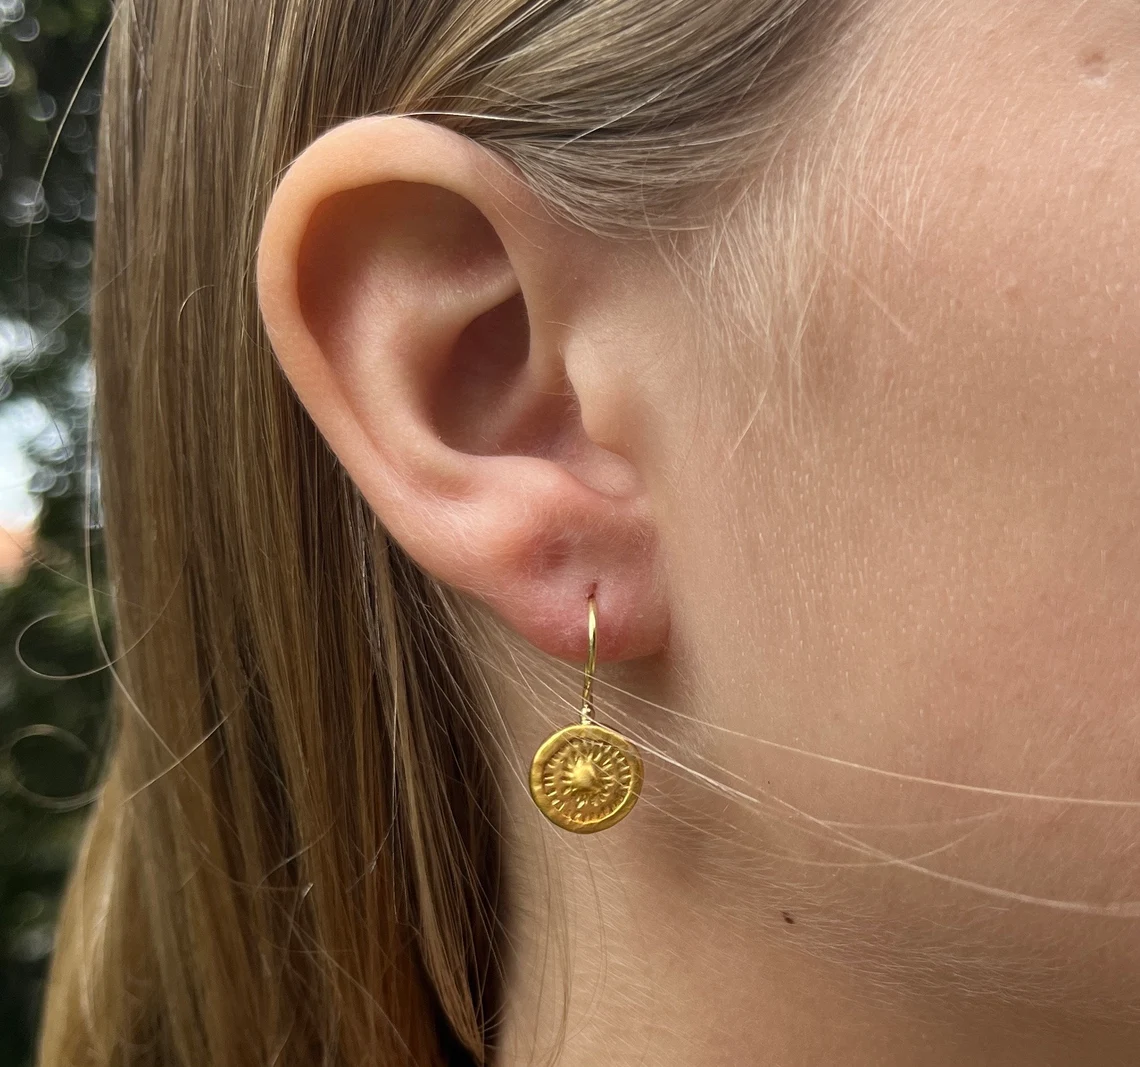 24k solid gold earring on the woman's ear